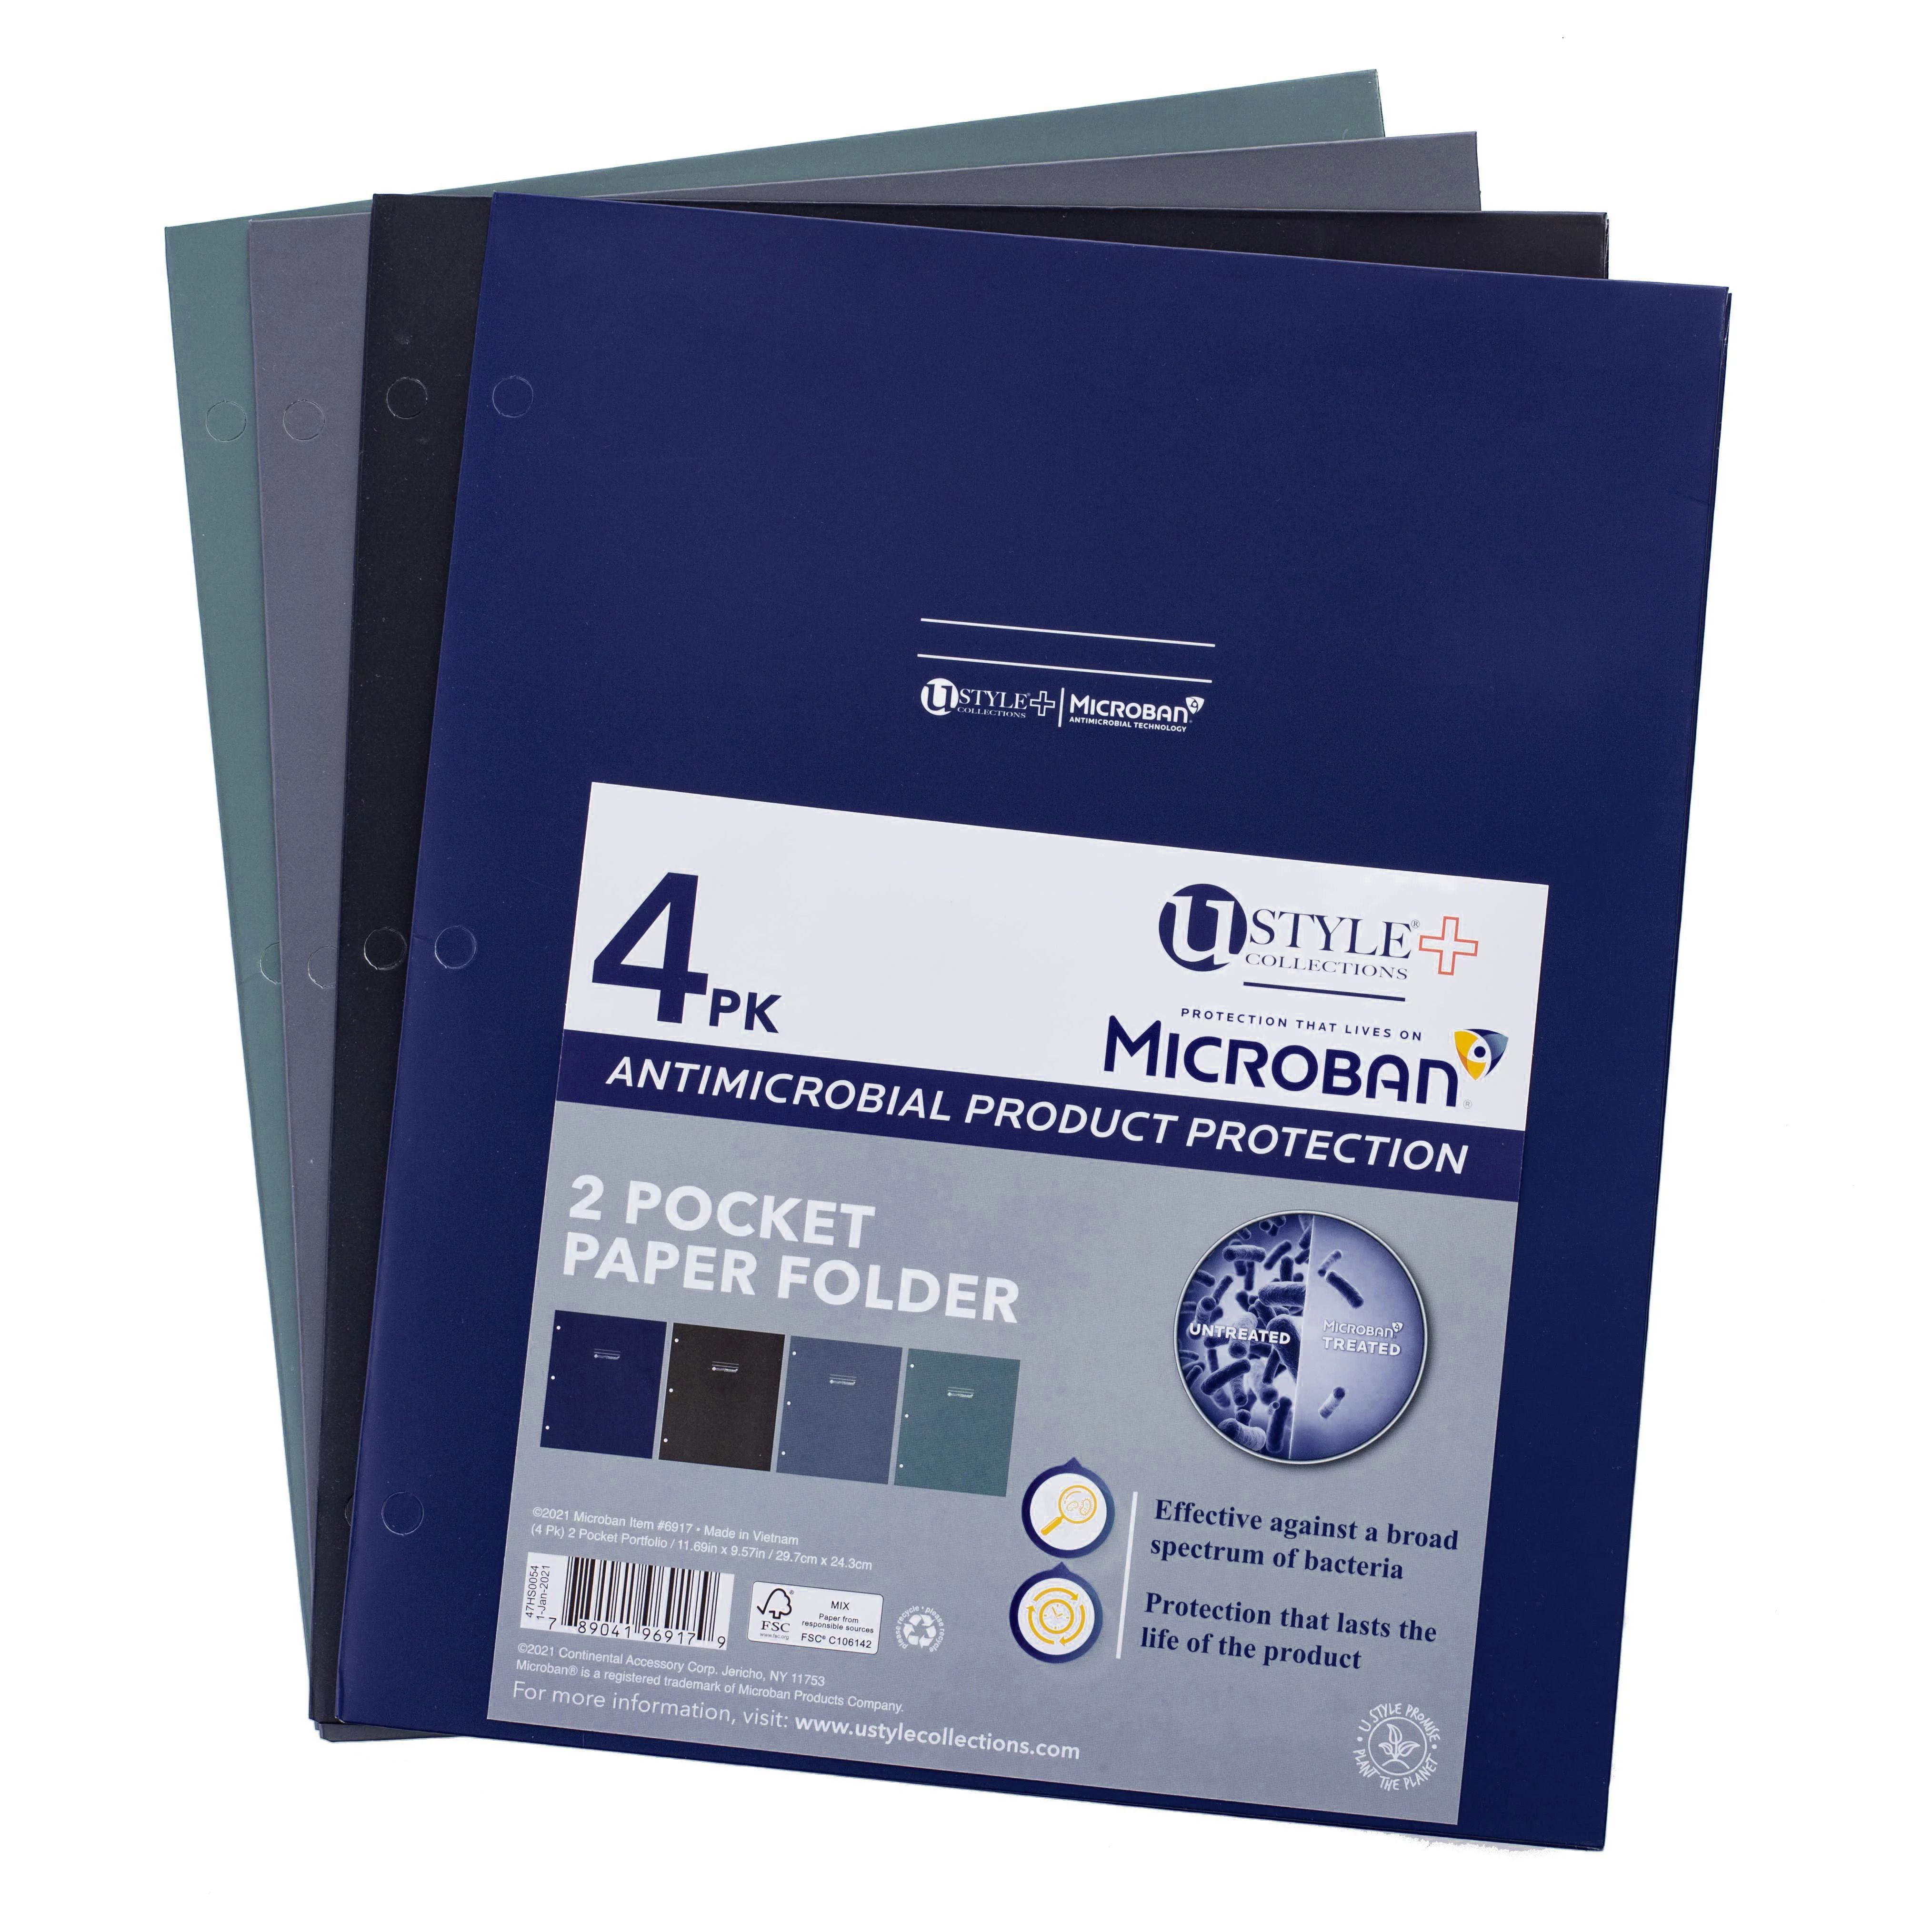 U Style Antimicrobial Two-Pocket Paper Folder with Microban, 4 Pack, Assorted (Navy, Black, Grey,... | Walmart (US)